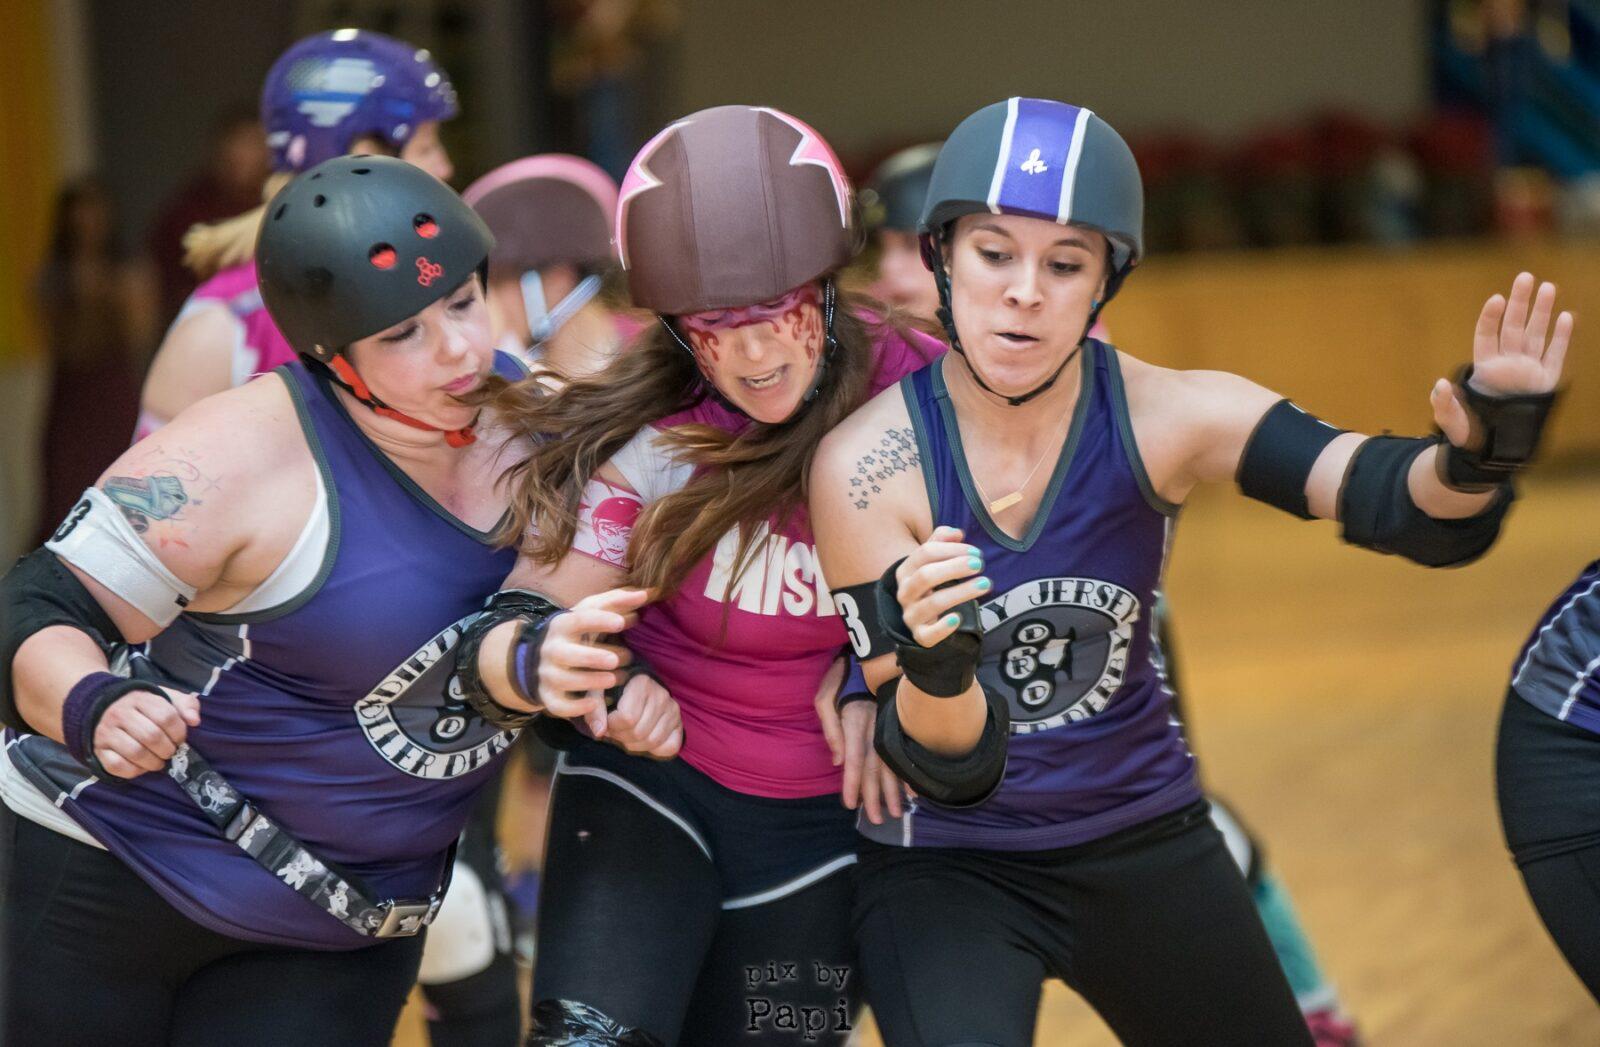 Rodeo City Roller Derby